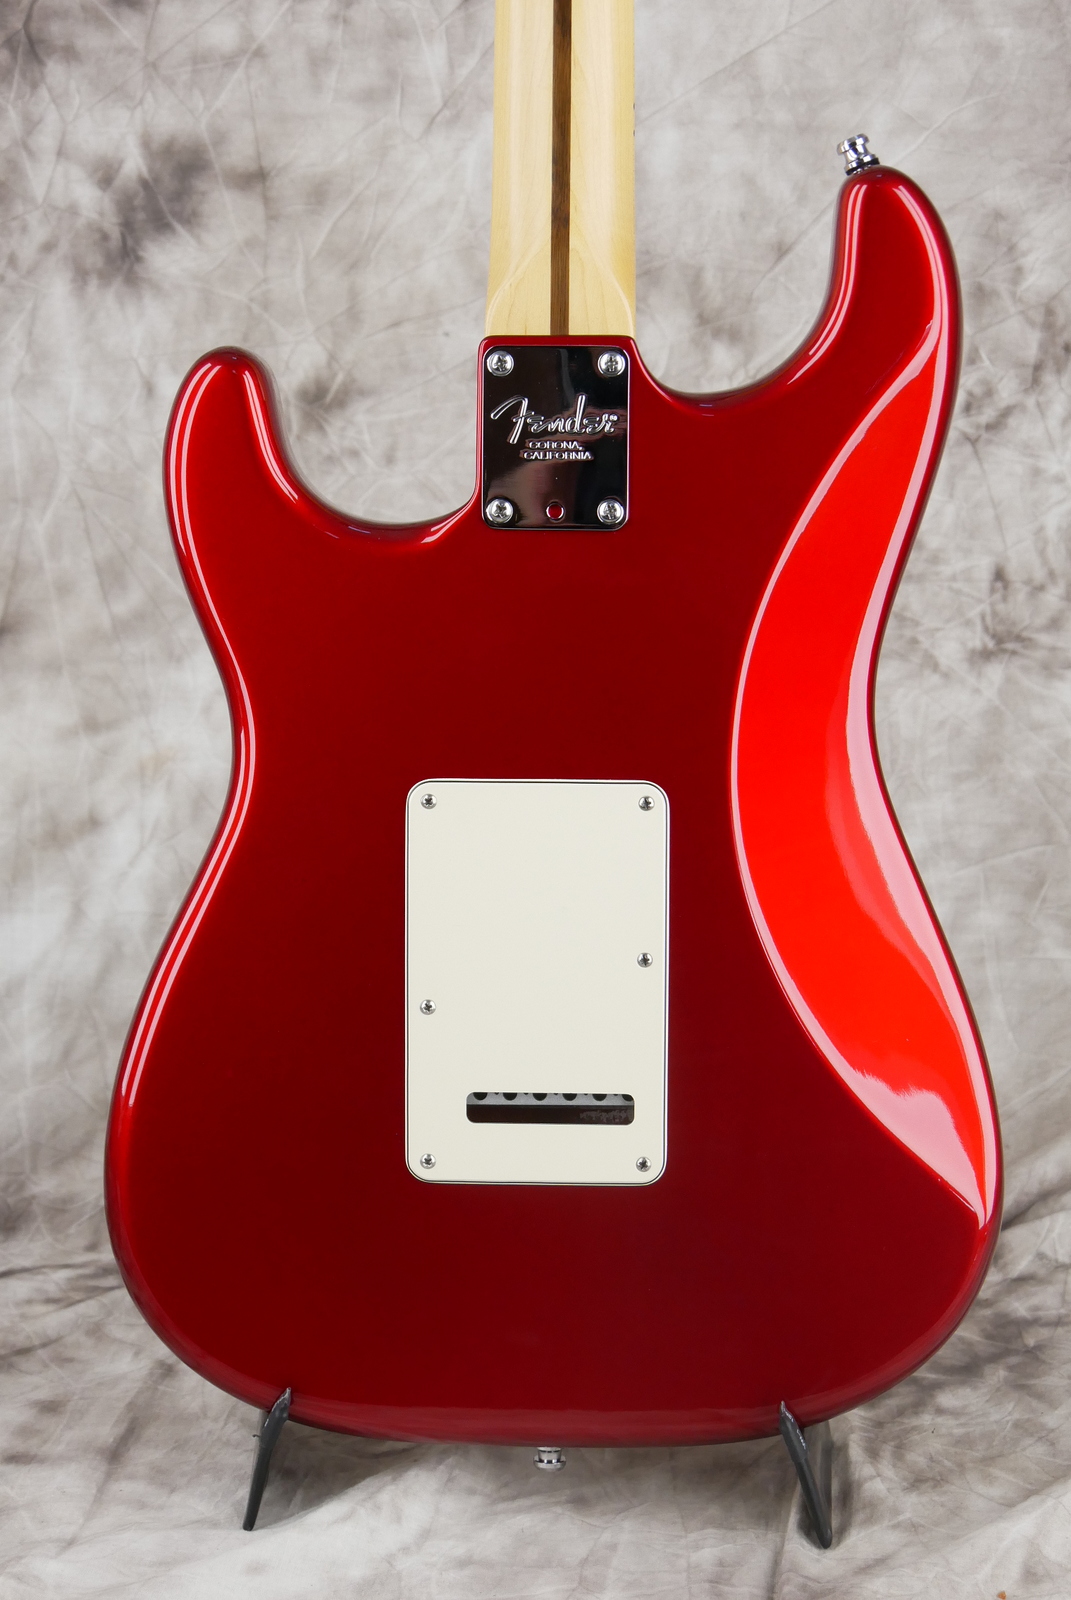 Fender_Stratocaster_USA_built_from_parts_candy_apple_red_2015-004.JPG